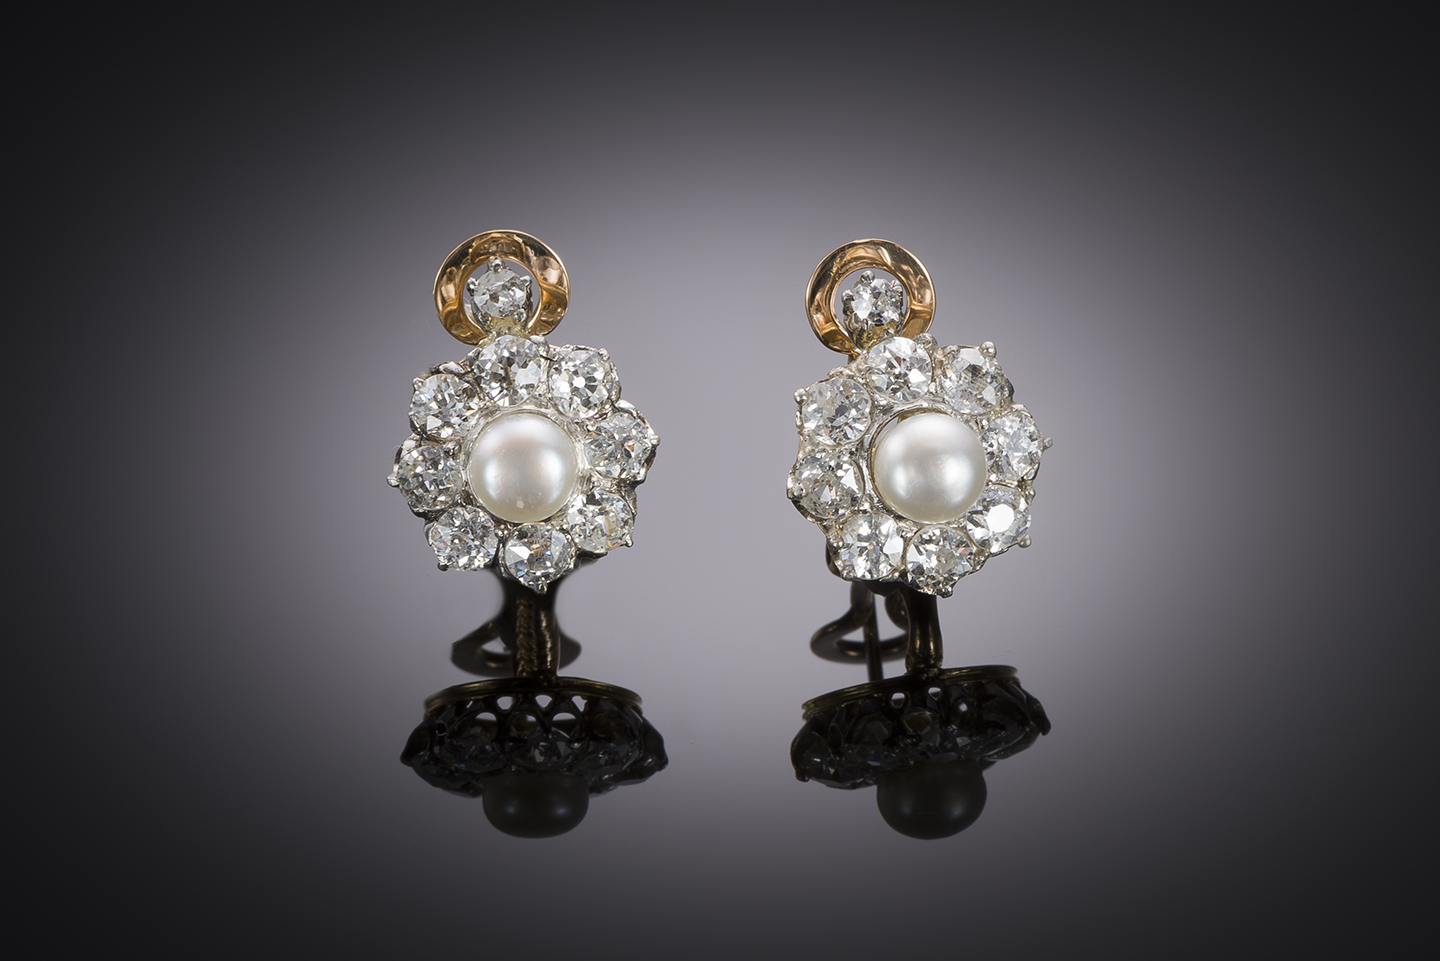 Fine pearl (LFG certificate) and diamond (2 carats) earrings early 20th century-1